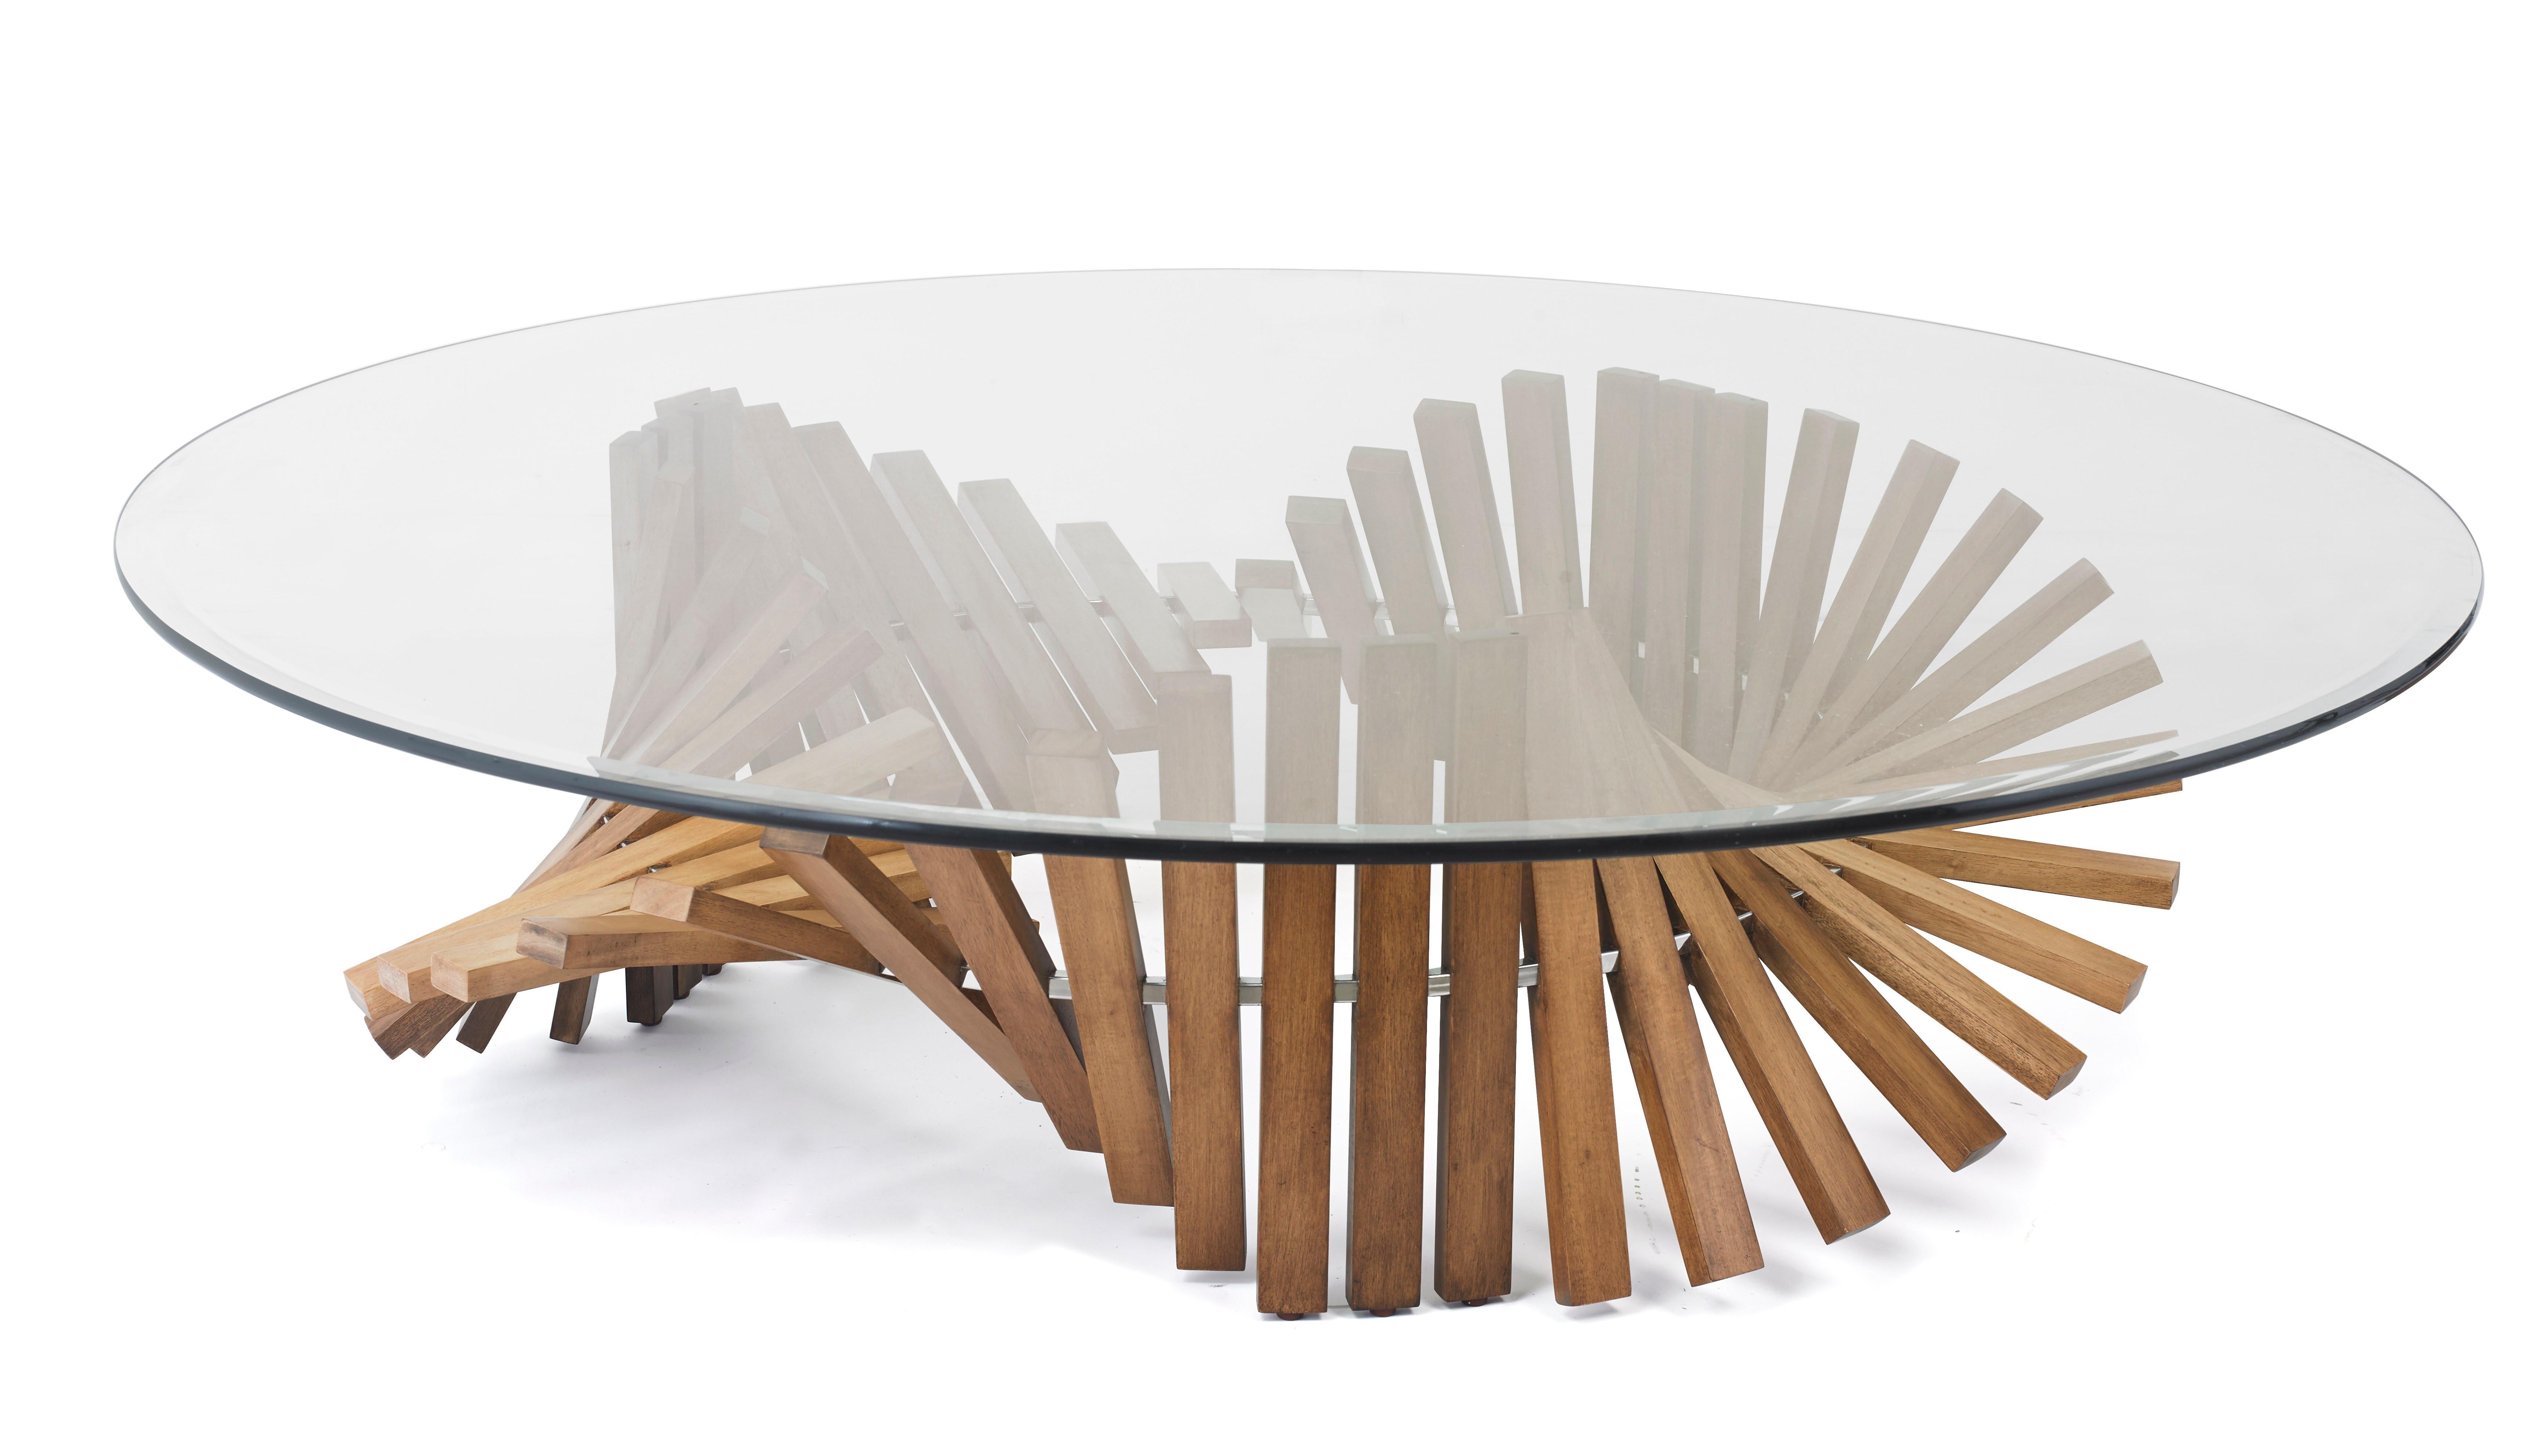 The cocktail table base is a marvel of natural wood, featuring captivating undulations that create an extraordinary design. Designed by the visionary Vito Selma, known for his ability to conceive the unimaginable, this piece is a testament to his